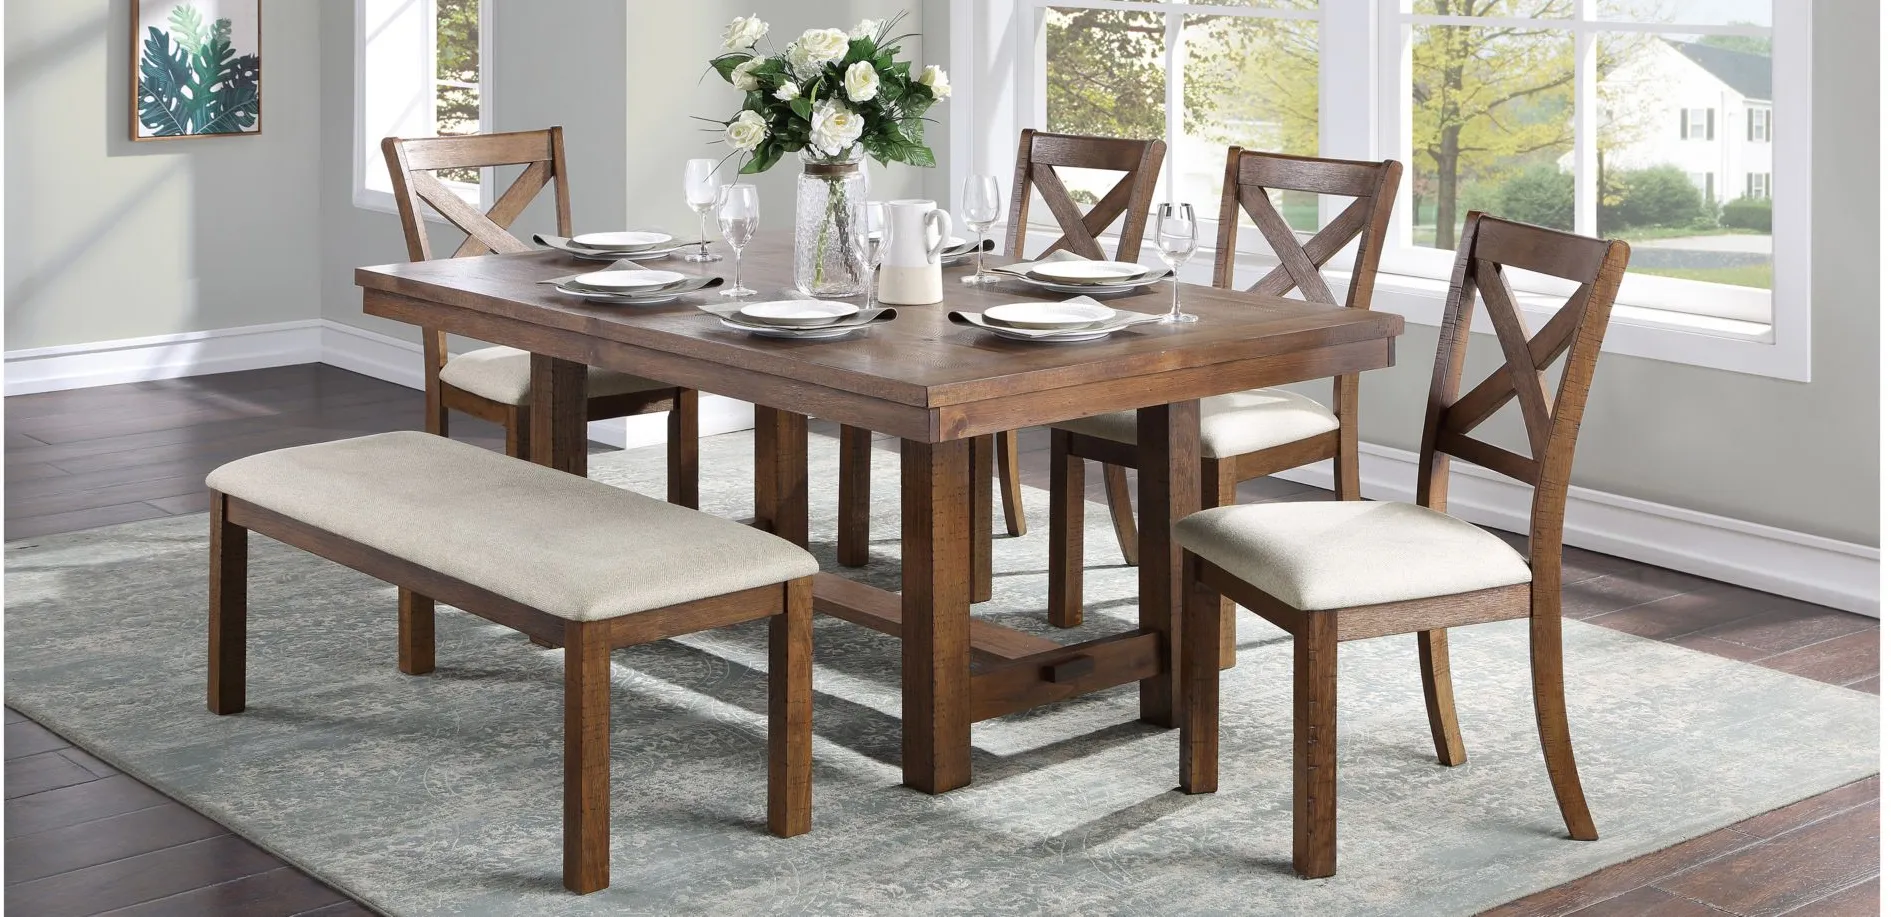 Levittown 6-pc Dining Set W/ Bench in Brown by Homelegance